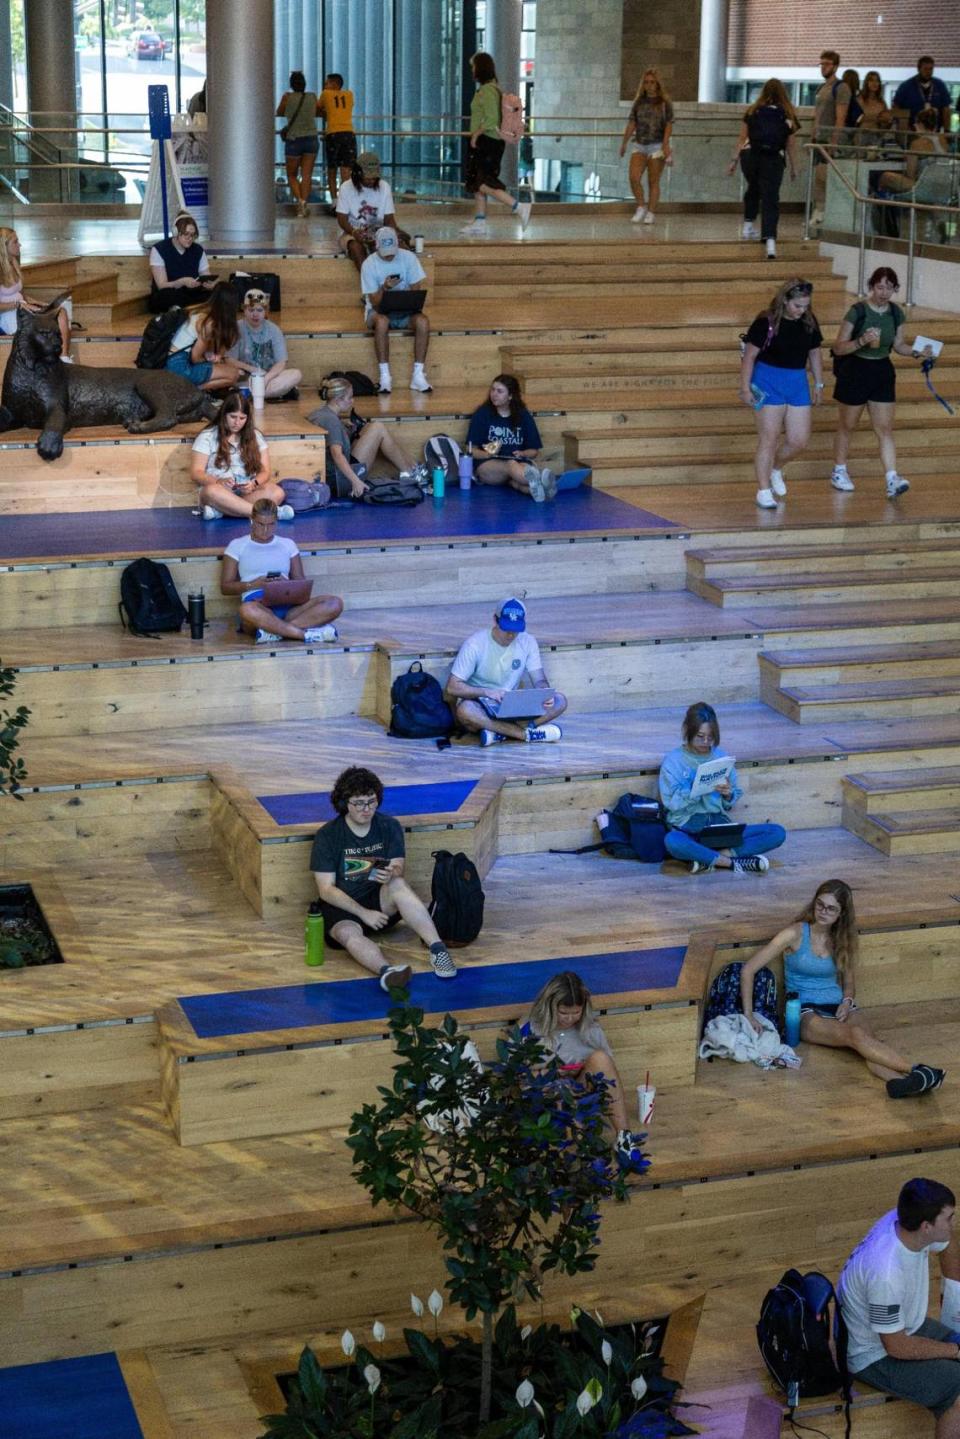 Students gather within several communal areas of UK’s Gatton Student Center between classes, August 21, 2023. Marcus Dorsey/mdorsey@herald-leader.com